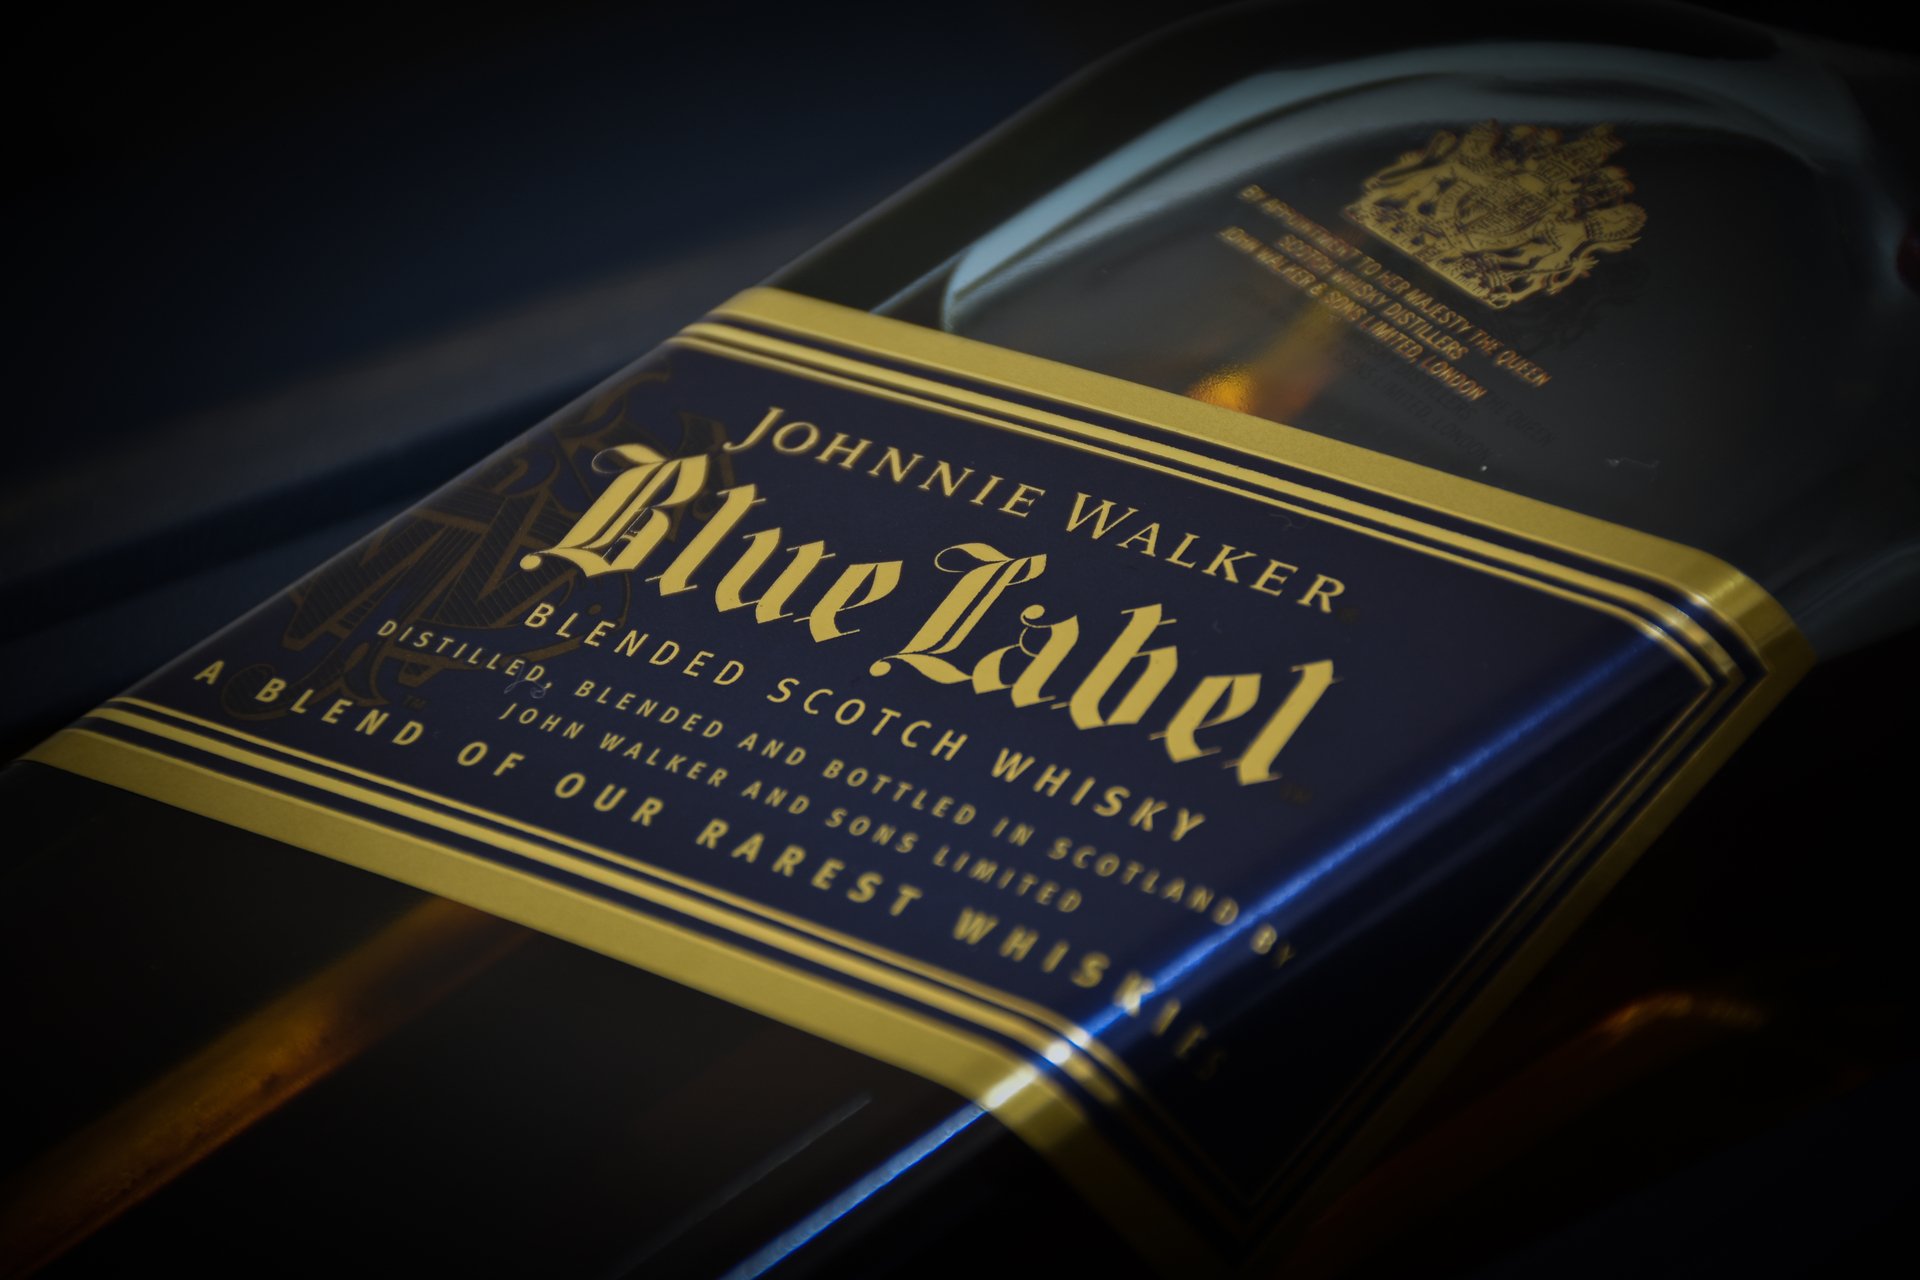 Johnnie Walker Blue Label is one of the most famous whisky blends